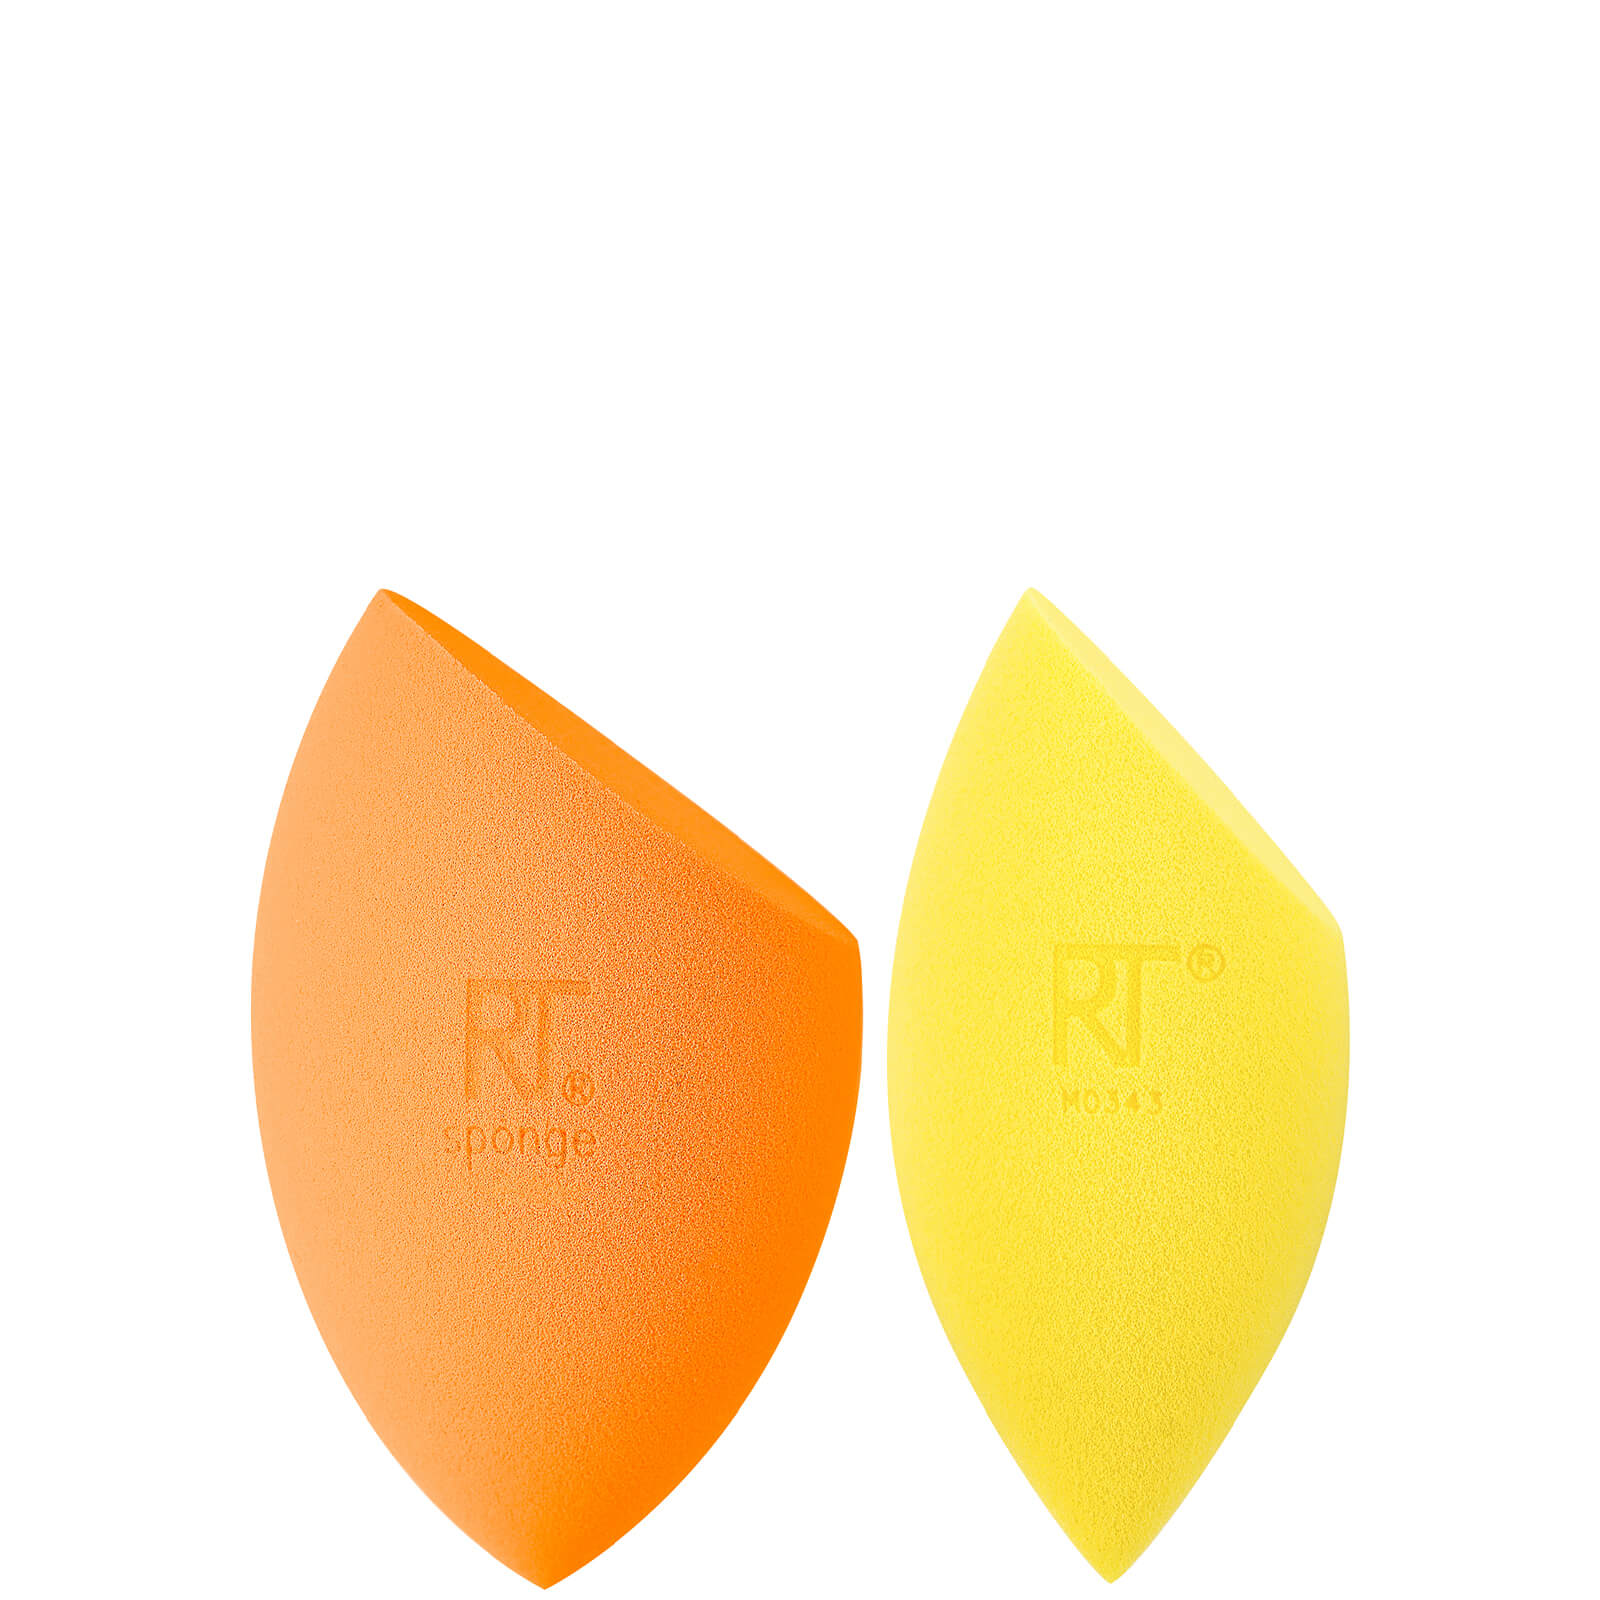 Image of Real Techniques Miracle Complexion Sponge and Concealer Sponge Duo